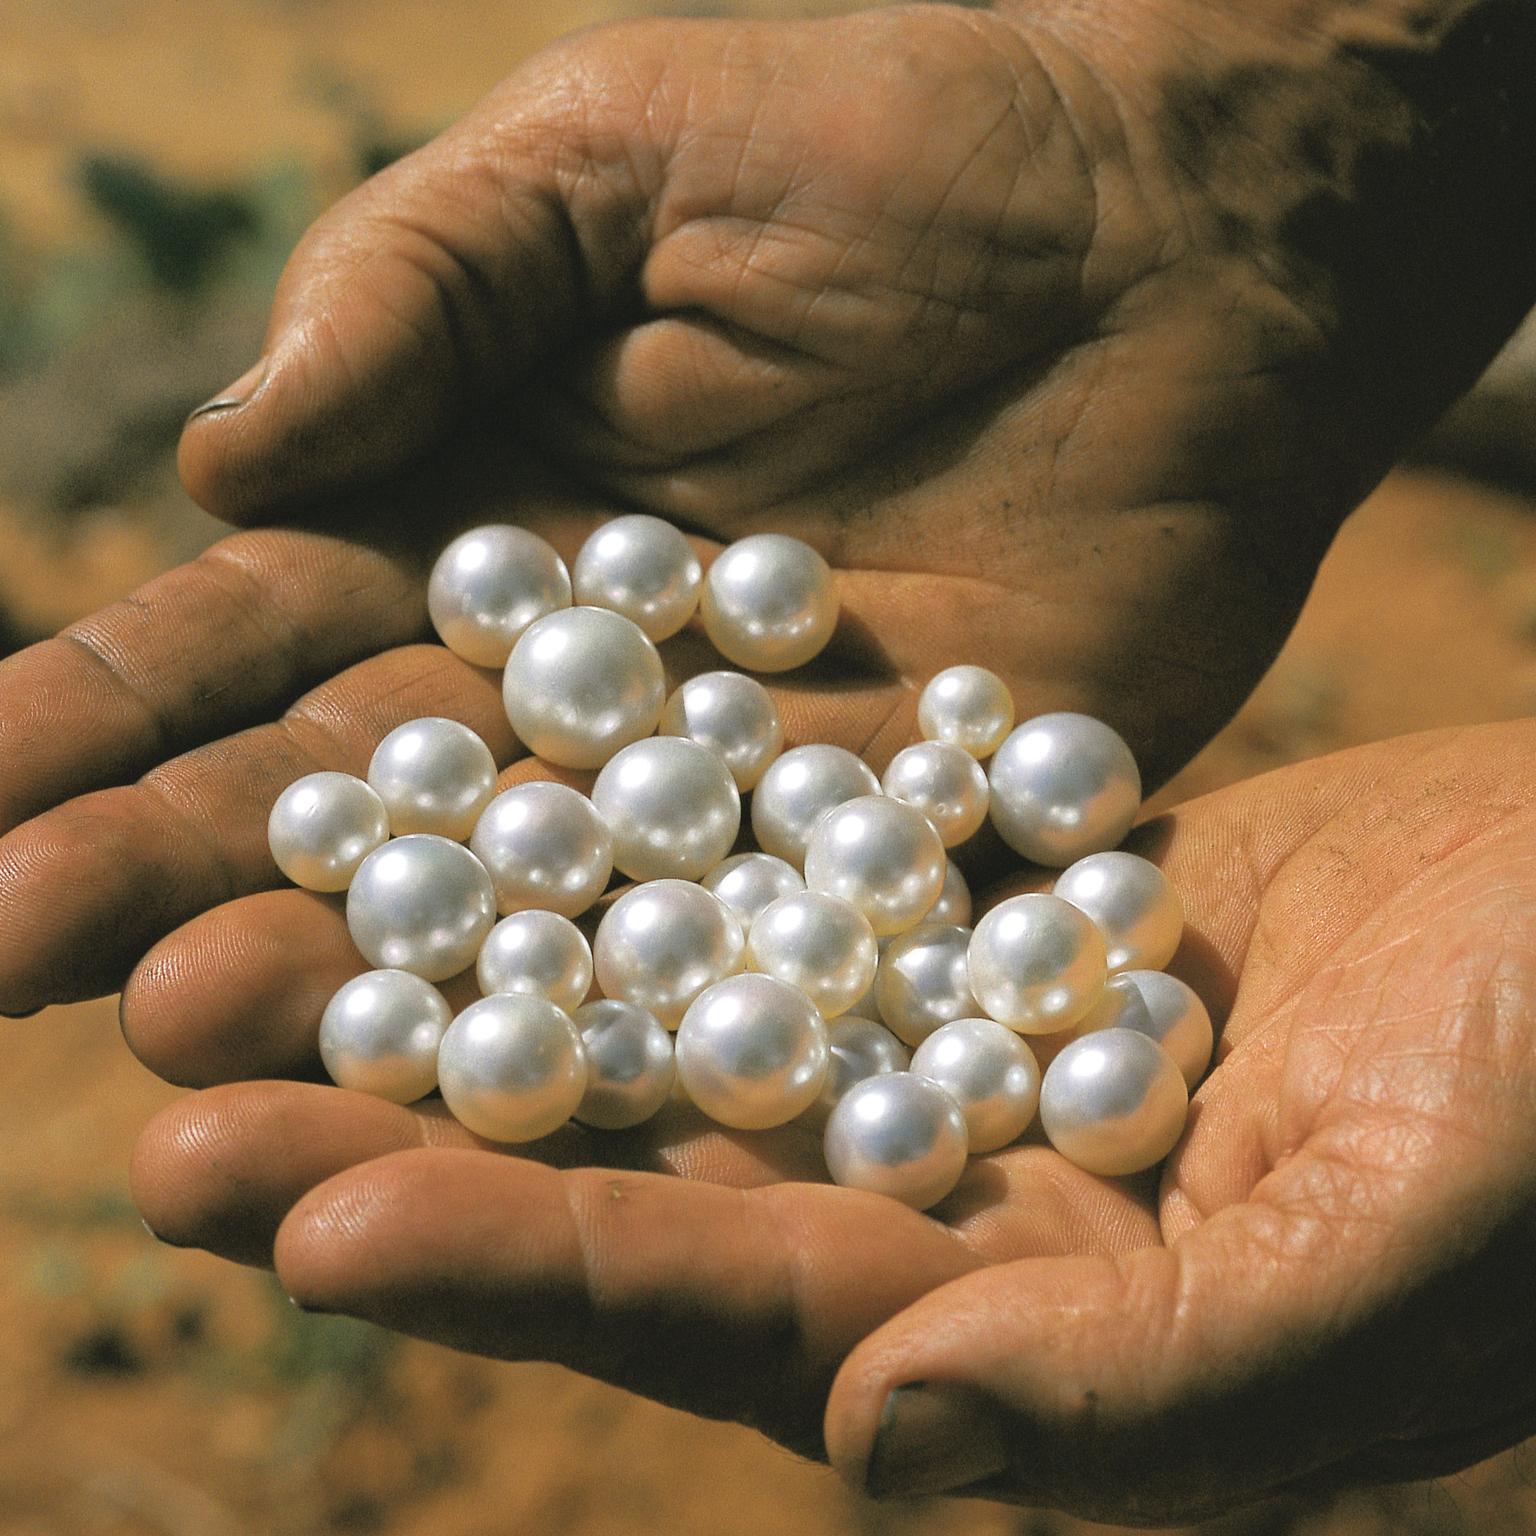 9 Easy Ways To Tell Real Pearls From Fake - PearlsOnly :: PearlsOnly